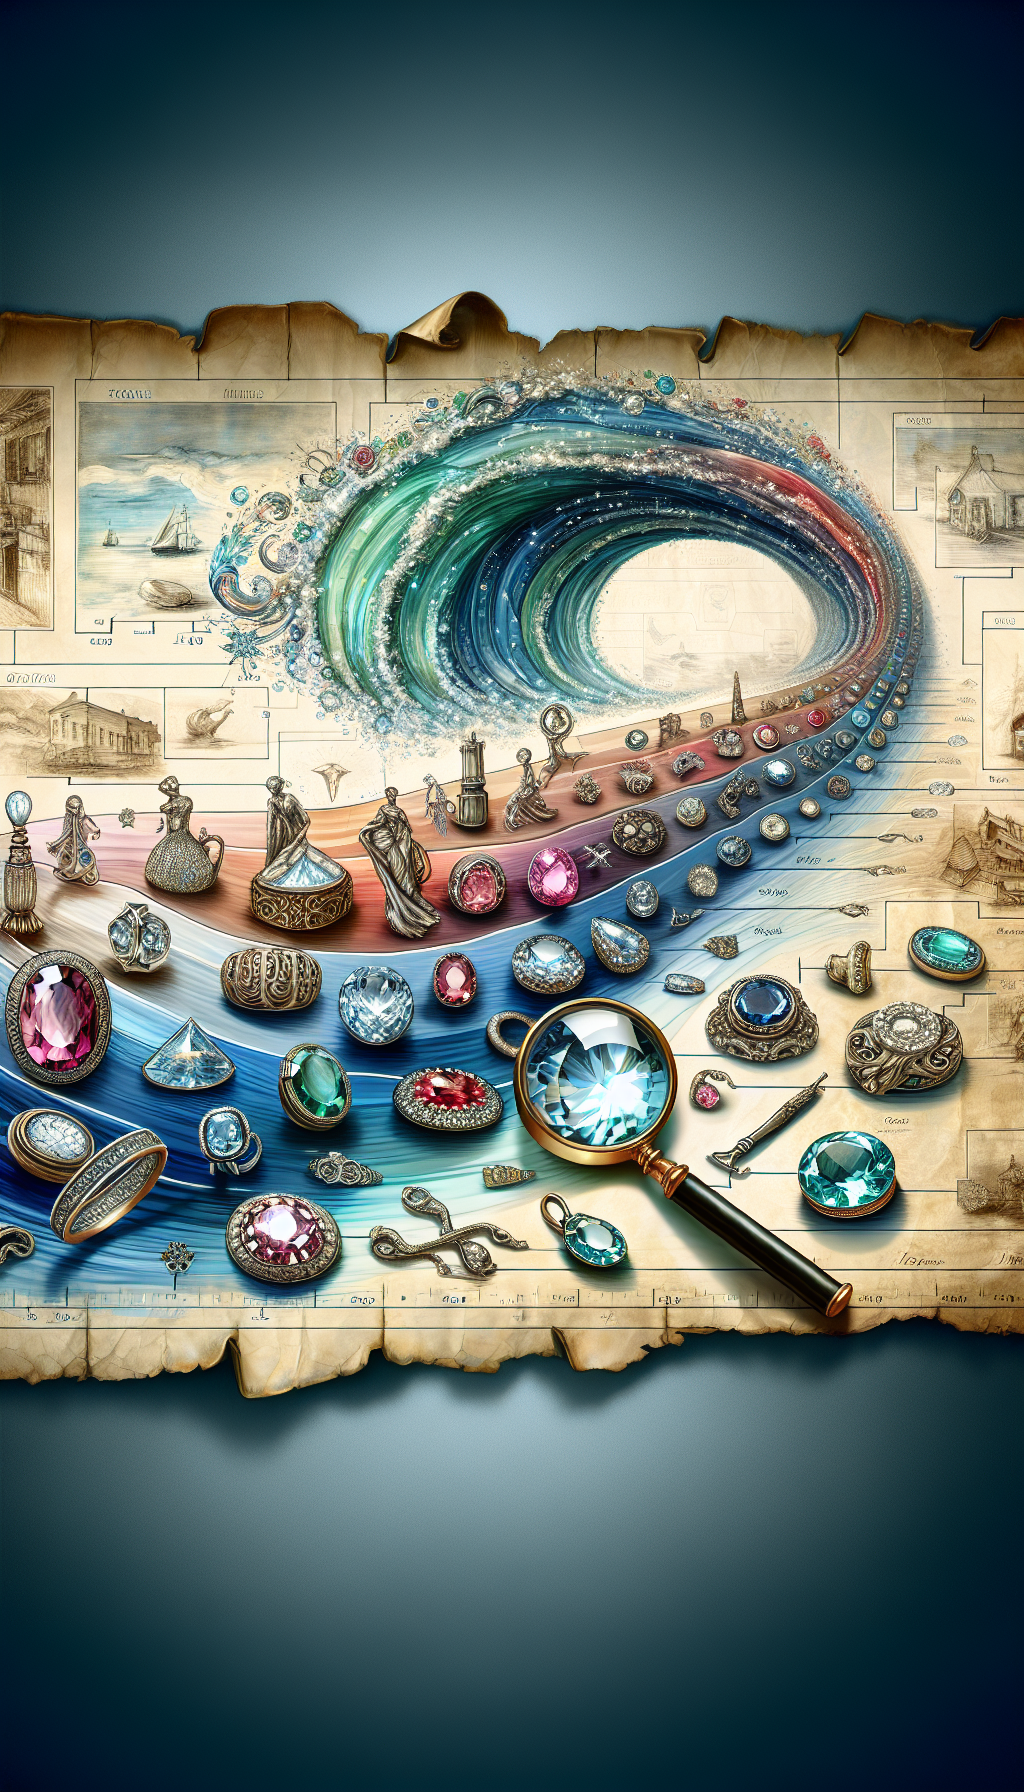 A whimsical timeline unfurls to display a progression of shimmering, meticulously detailed gemstones, each cut reflecting historical eras—ancient cabochons to Georgian rose cuts and Victorian old mine cuts. Beside them, a magnifying glass hovers, revealing the intricate settings and hallmarks beneath, transforming the timeline into an interactive guide for antique jewelry identification. The styles alternate between realistic and impressionist brushstrokes, evoking the passage of time.